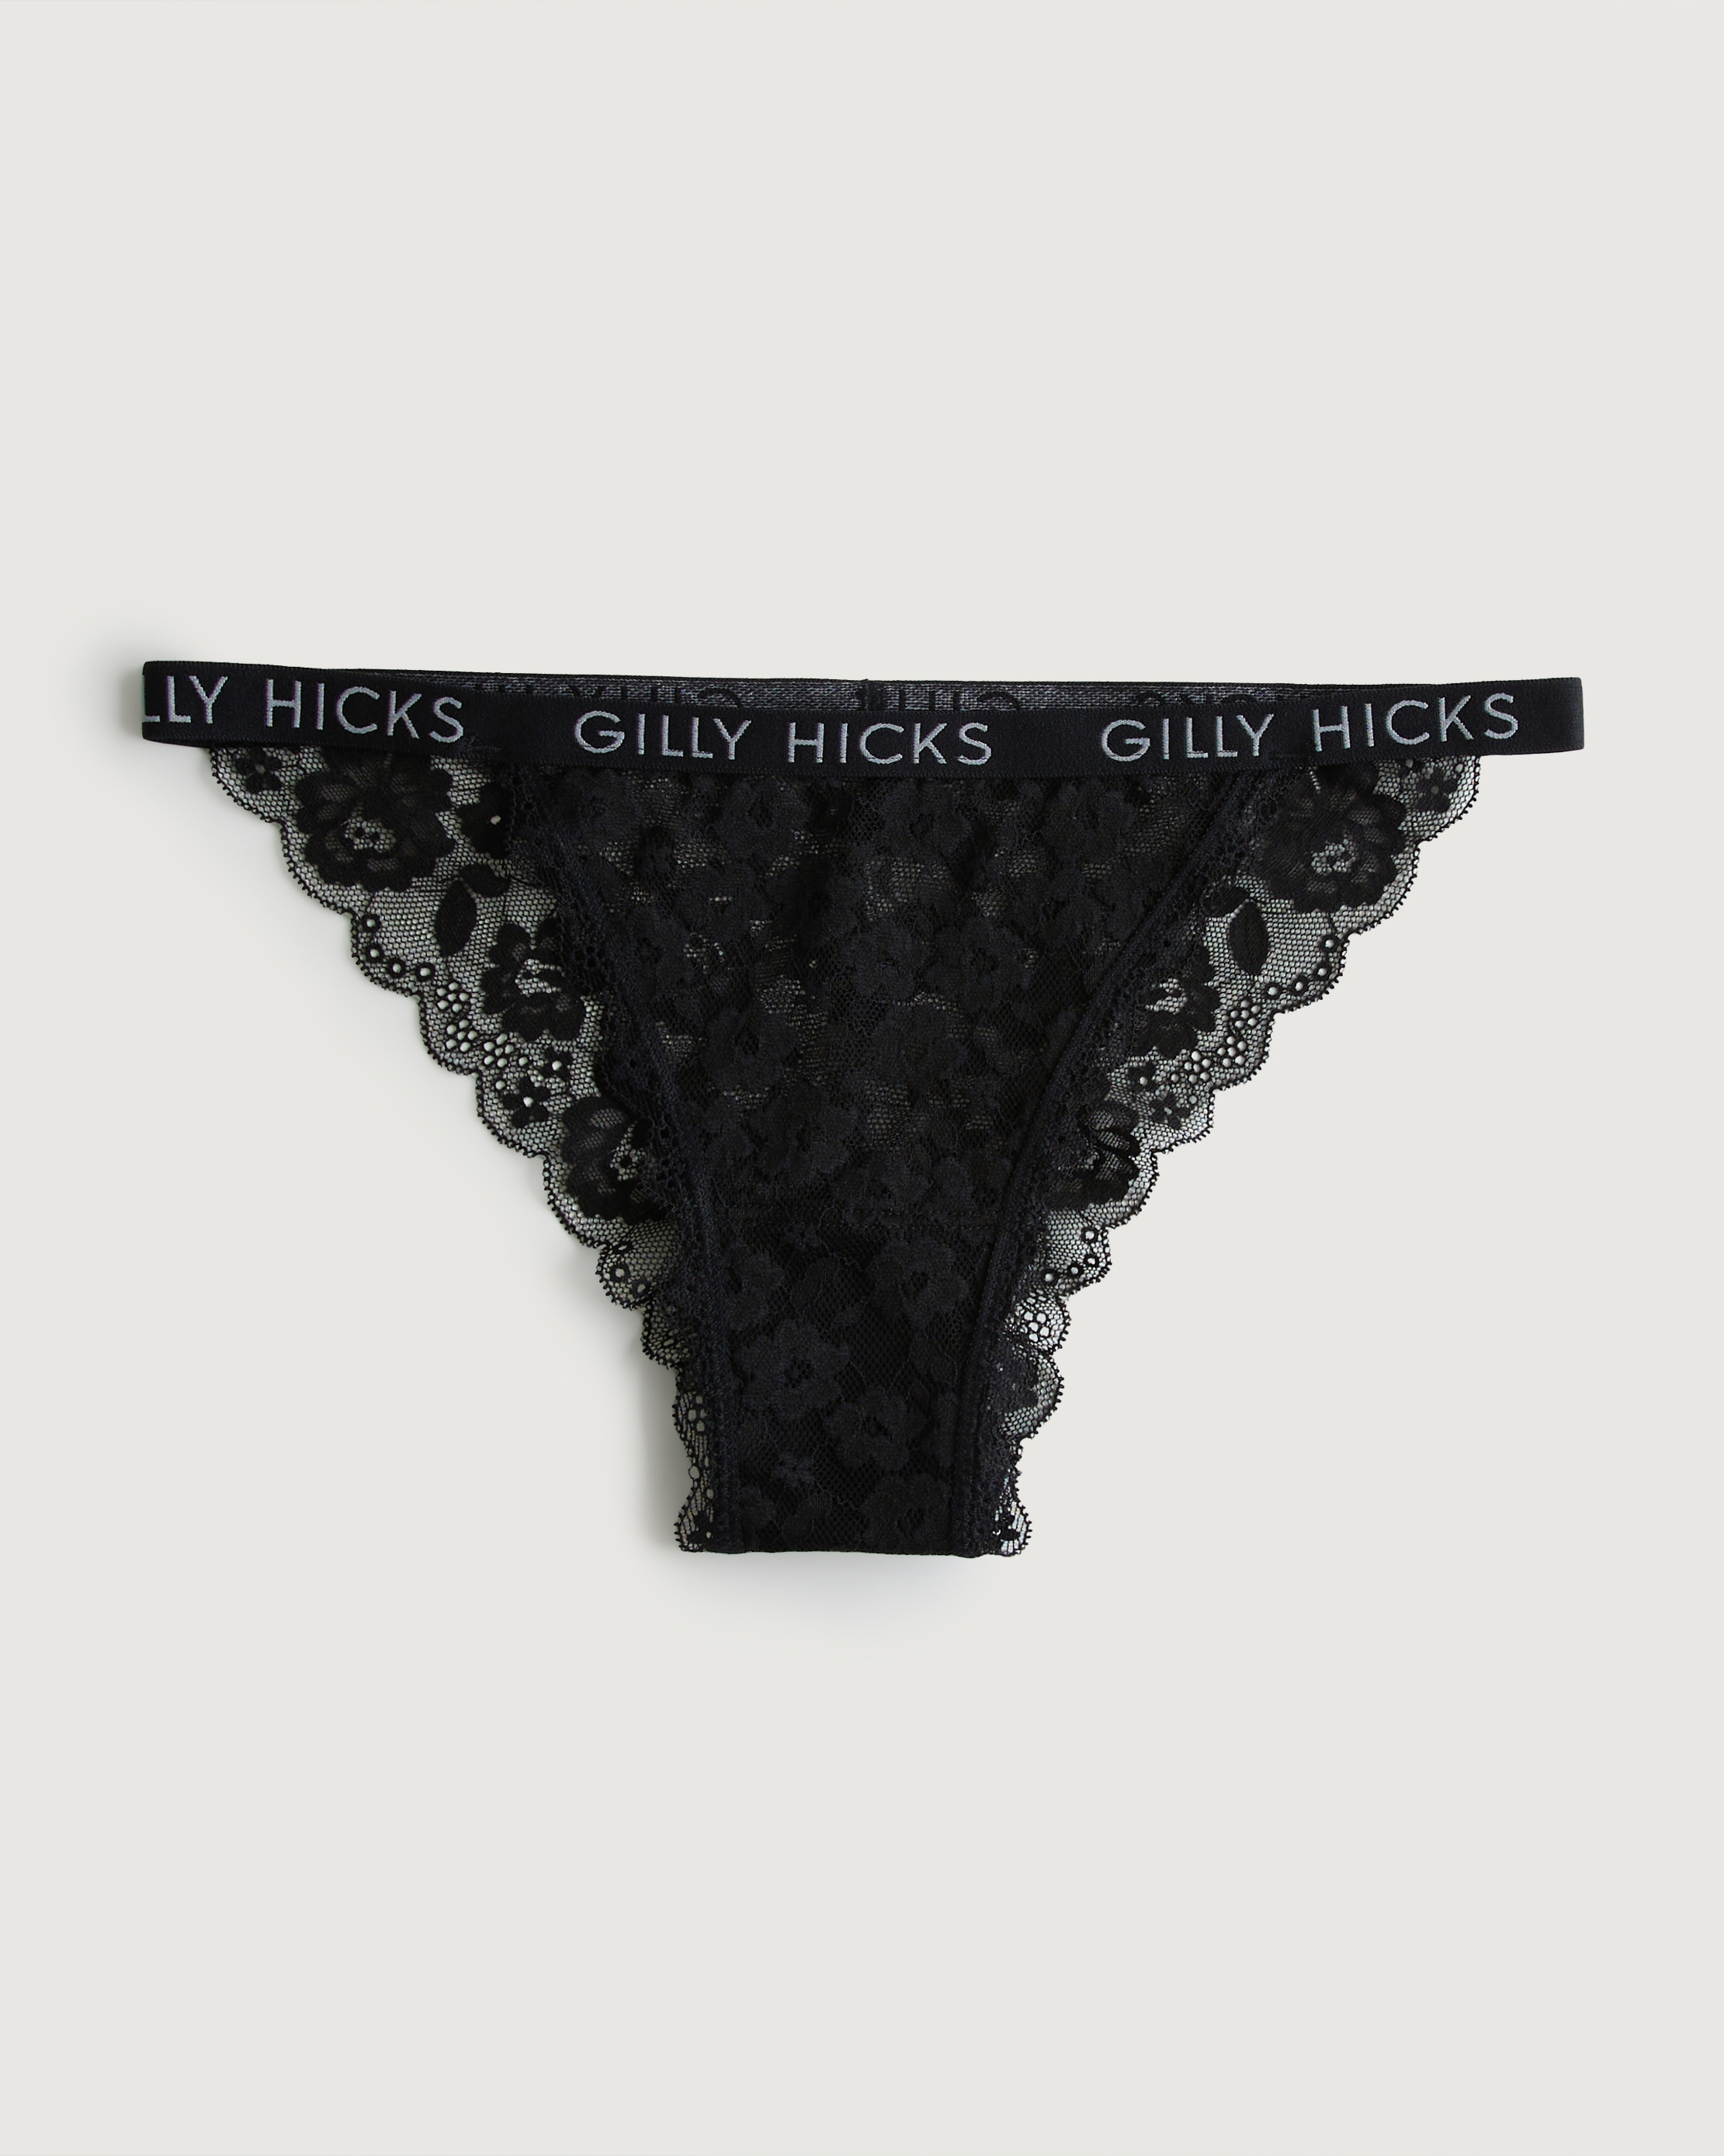 Gilly Hicks UK stores rebrand for gender-inclusive future - Retail